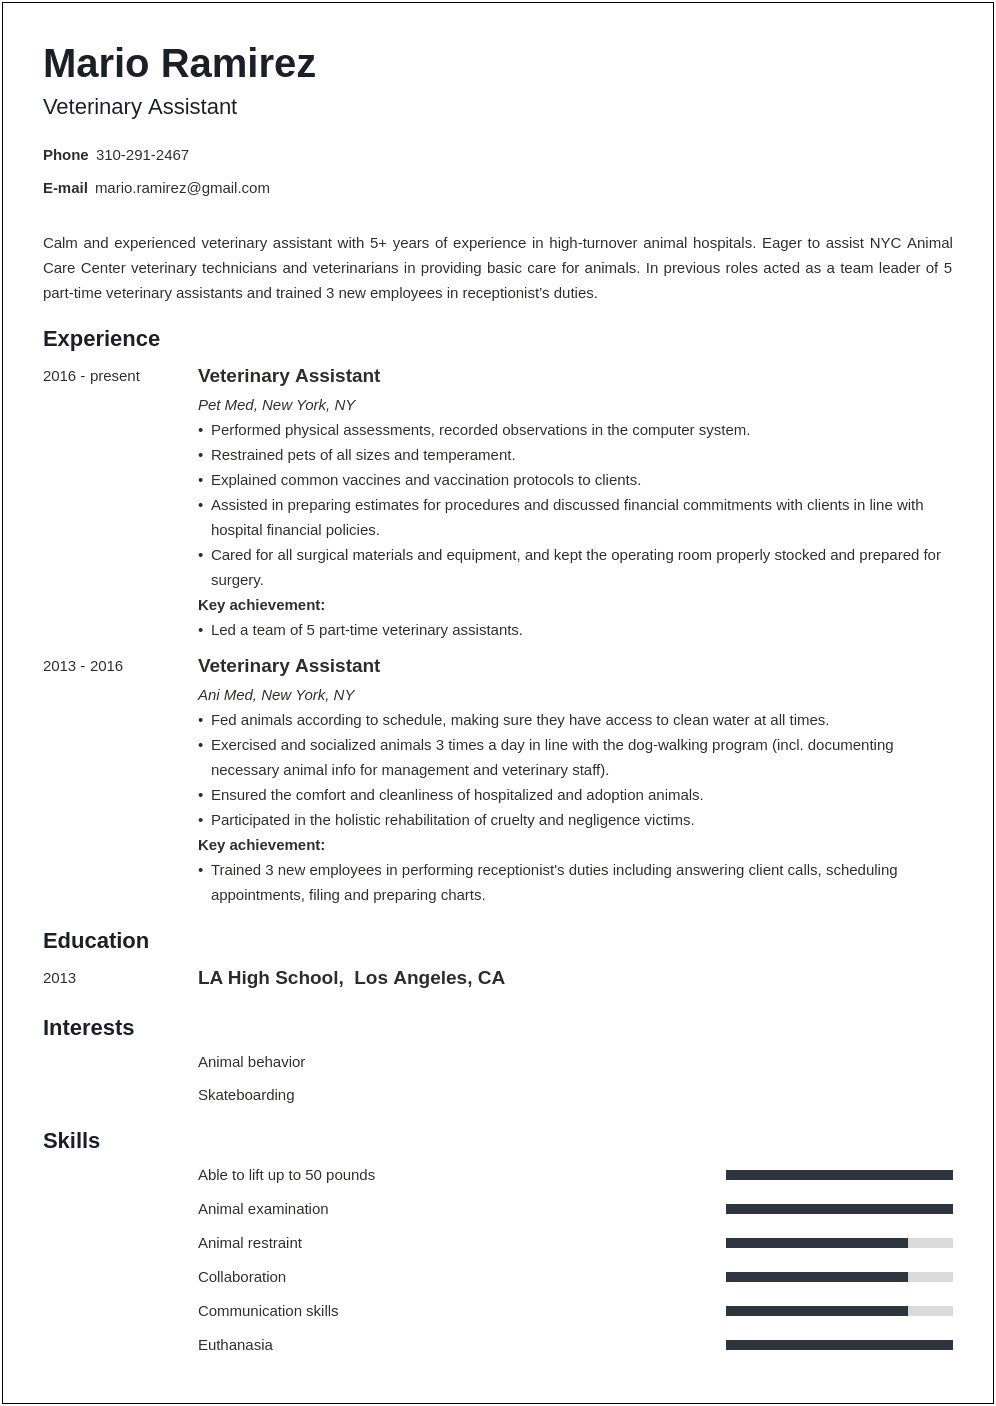 Resume Obtectives Examples Animal Care